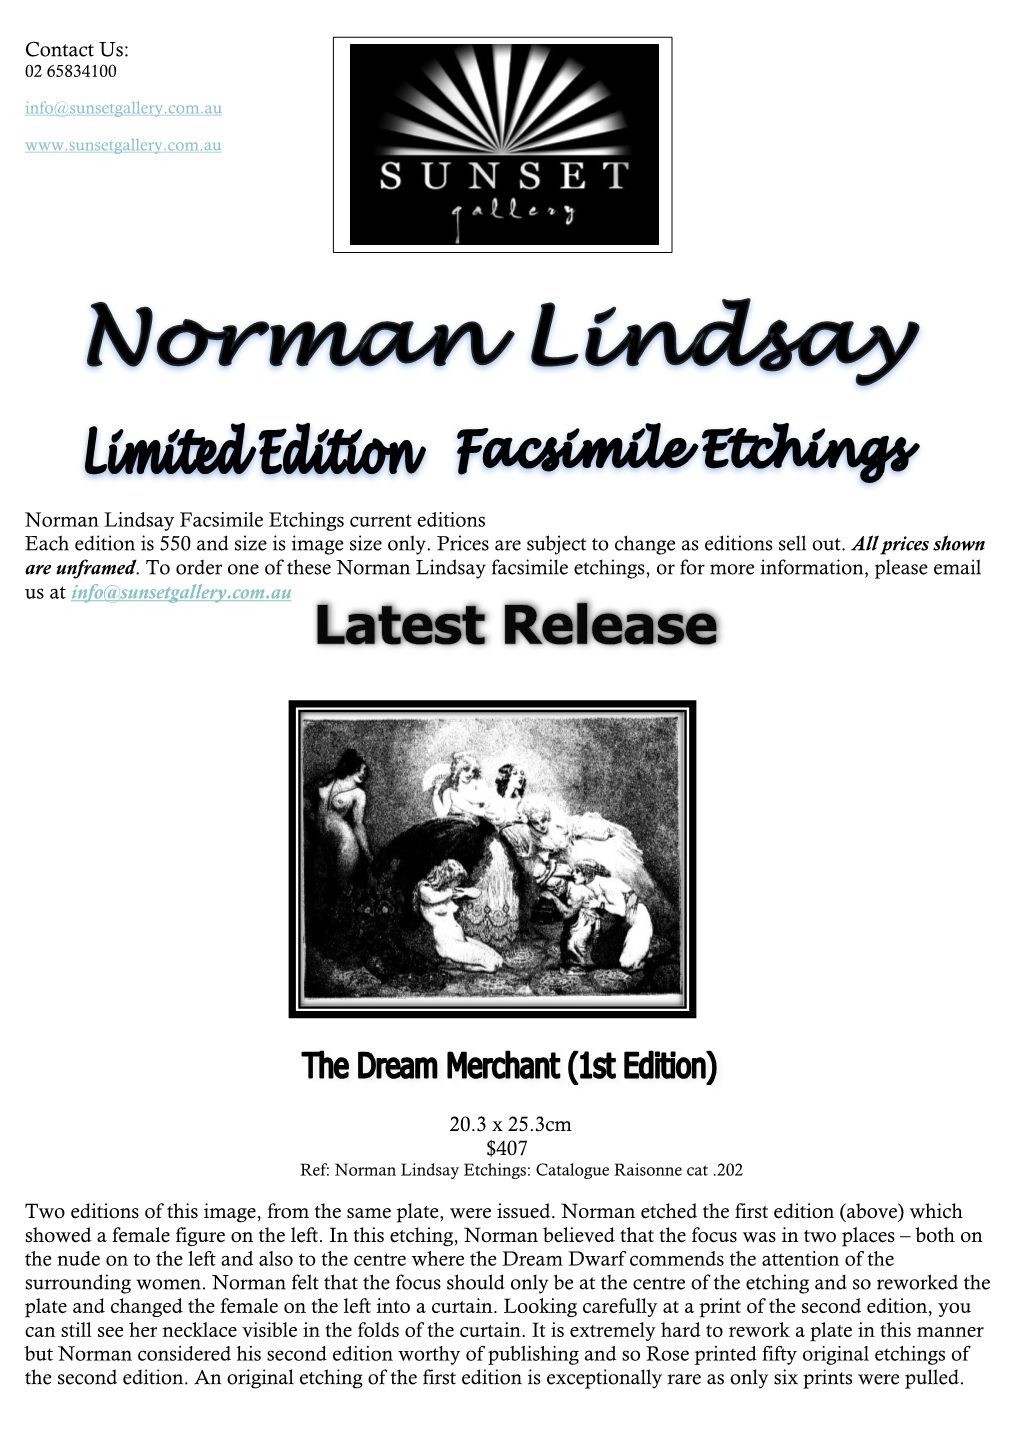 Norman Lindsay Facsimile Etchings Current Editions Each Edition Is 550 and Size Is Image Size Only